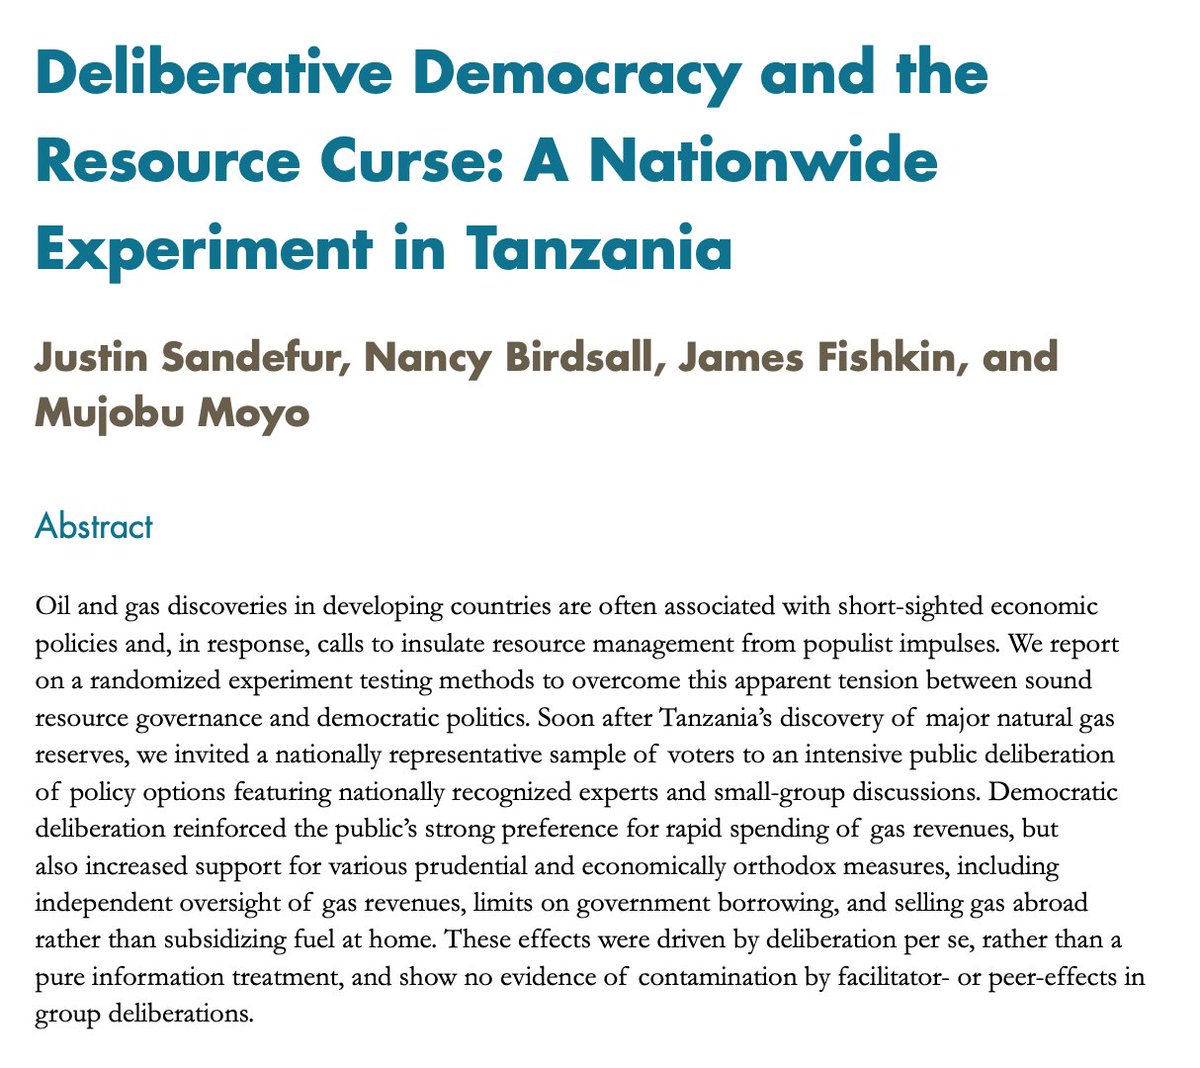 Can deliberative democracy overcome the resource curse? https://www.cgdev.org/sites/default/files/deliberative-democracy-resource-curse-nationwide-experiment-tanzania.pdfWe finally have a paper based on Tanzania RCT with  @nancymbirdsall, Jim Fishkin, and  @Mujobu + enormous work by  @JenLRichmond, Faraz Haqqi, and others.